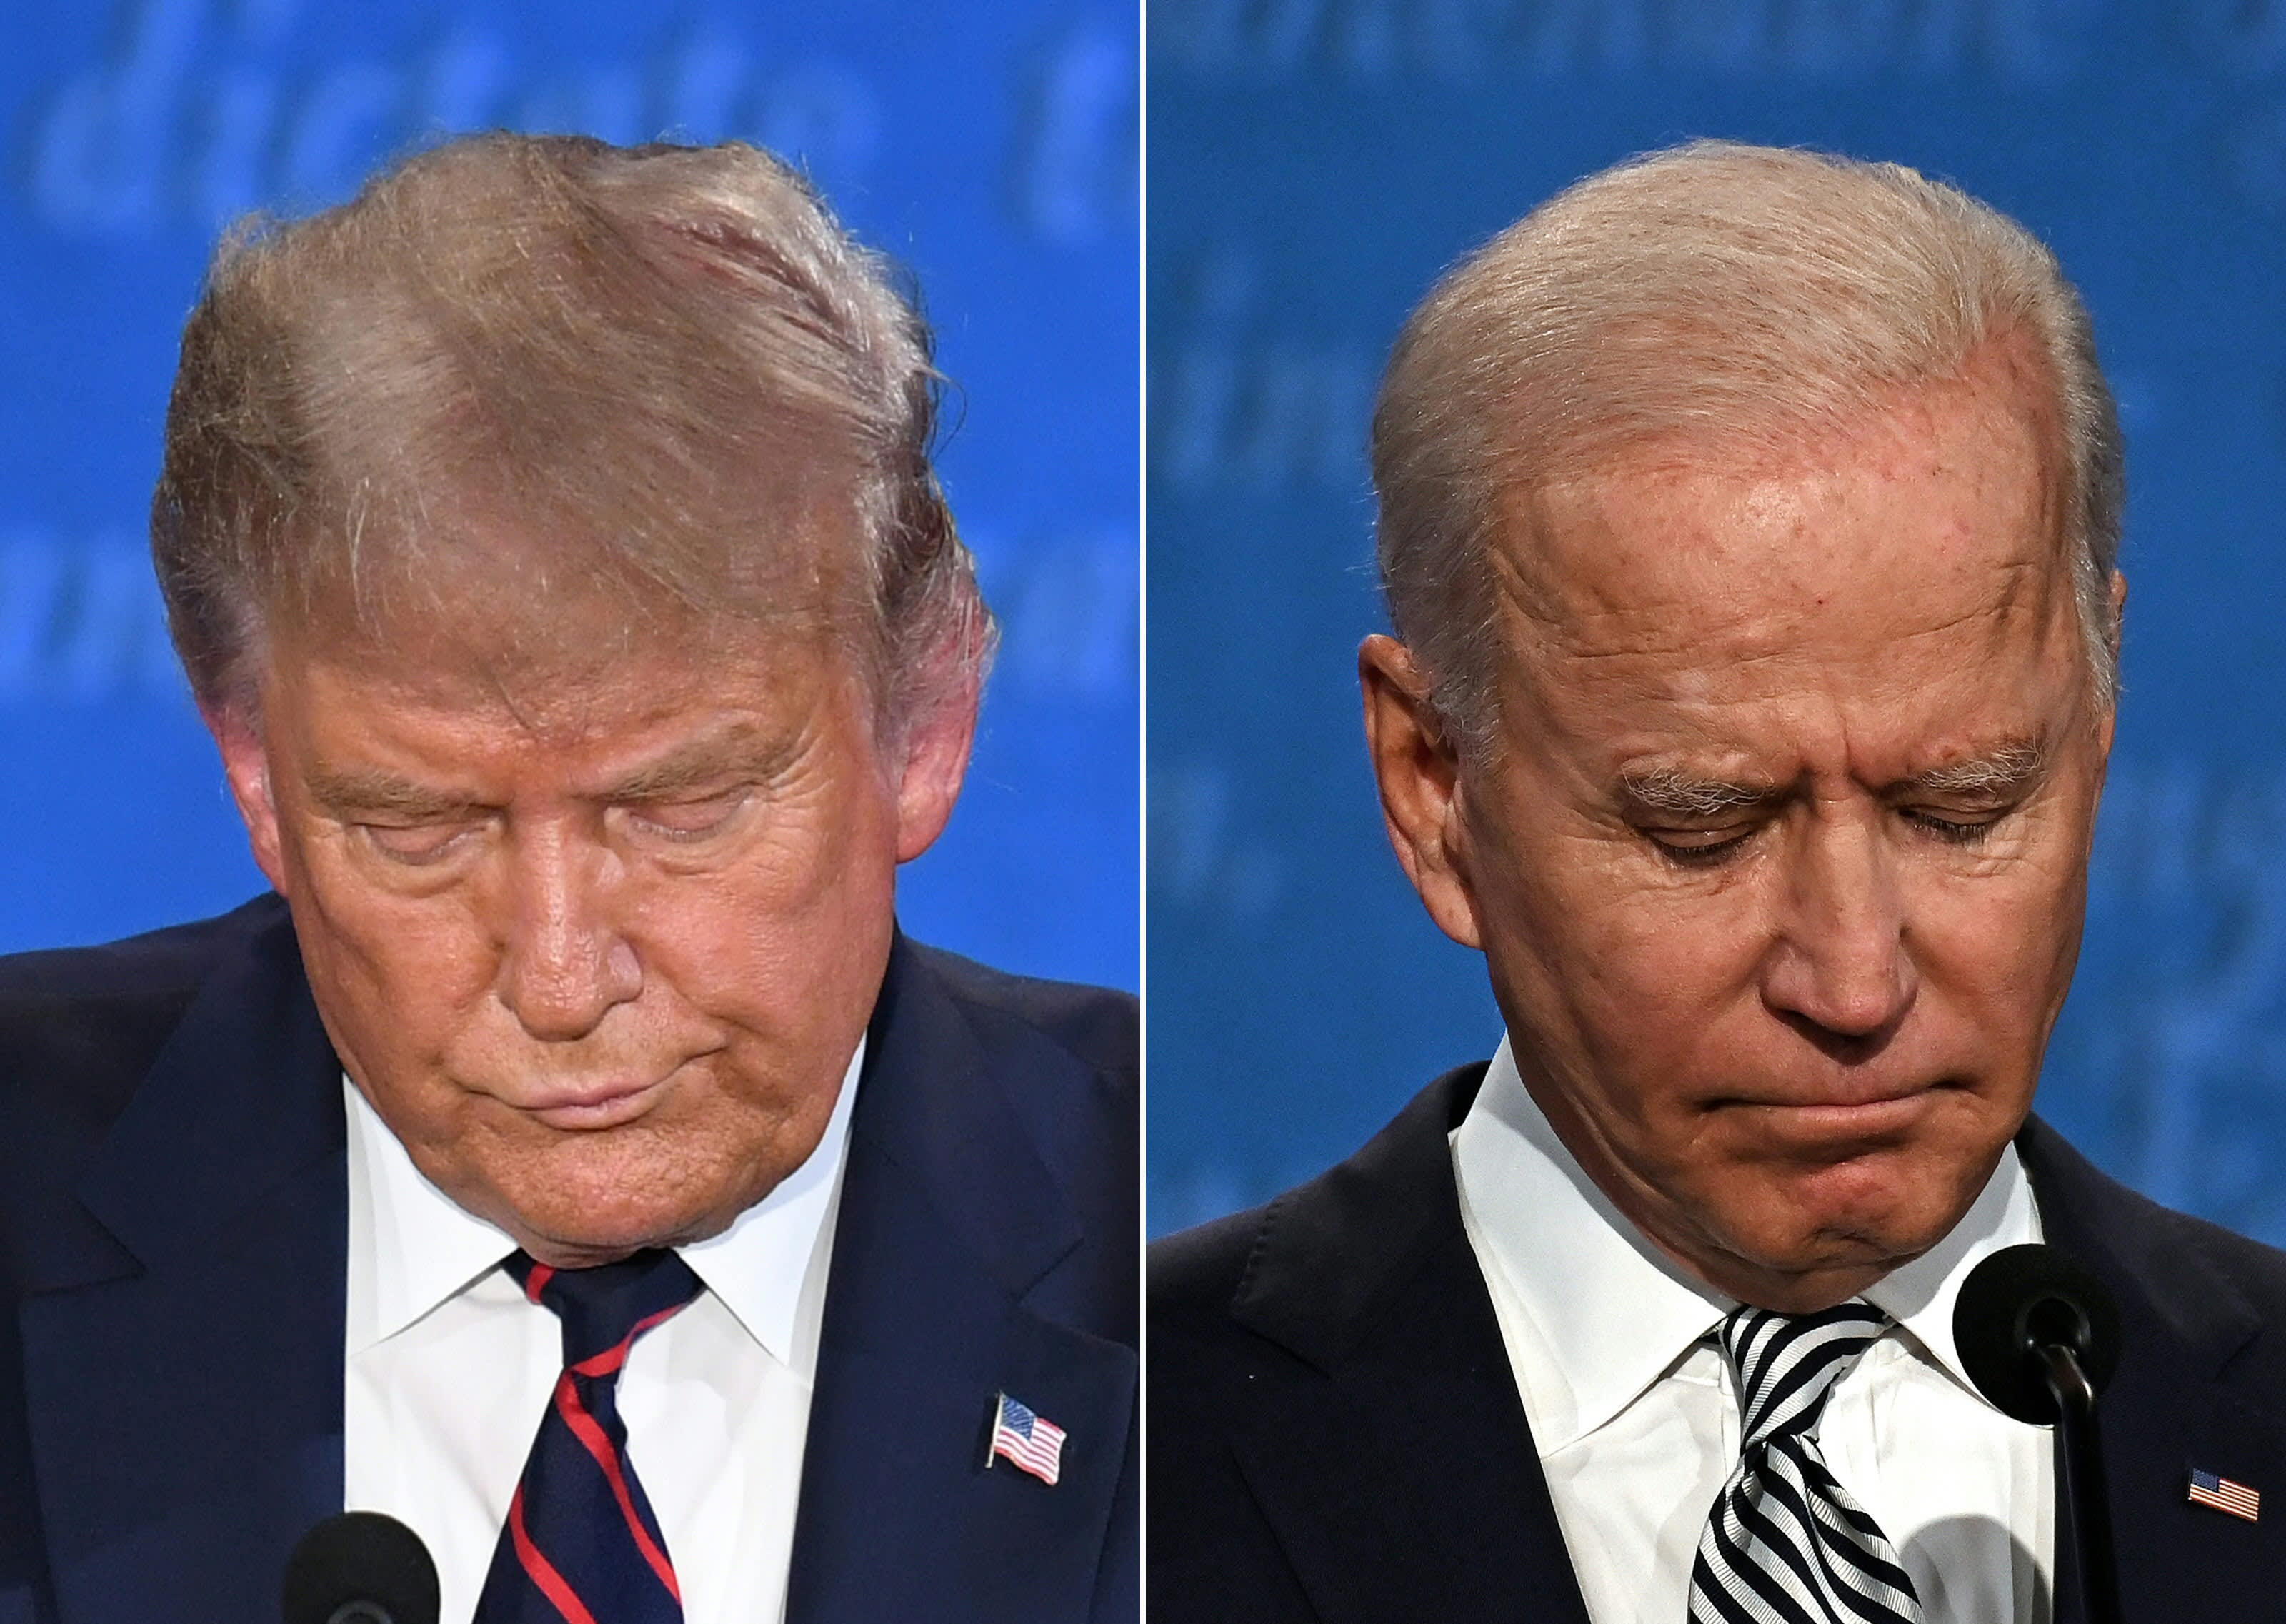 Trump vs. Biden debate rules to change, with possible mic mute, after ugly first round - CNBC